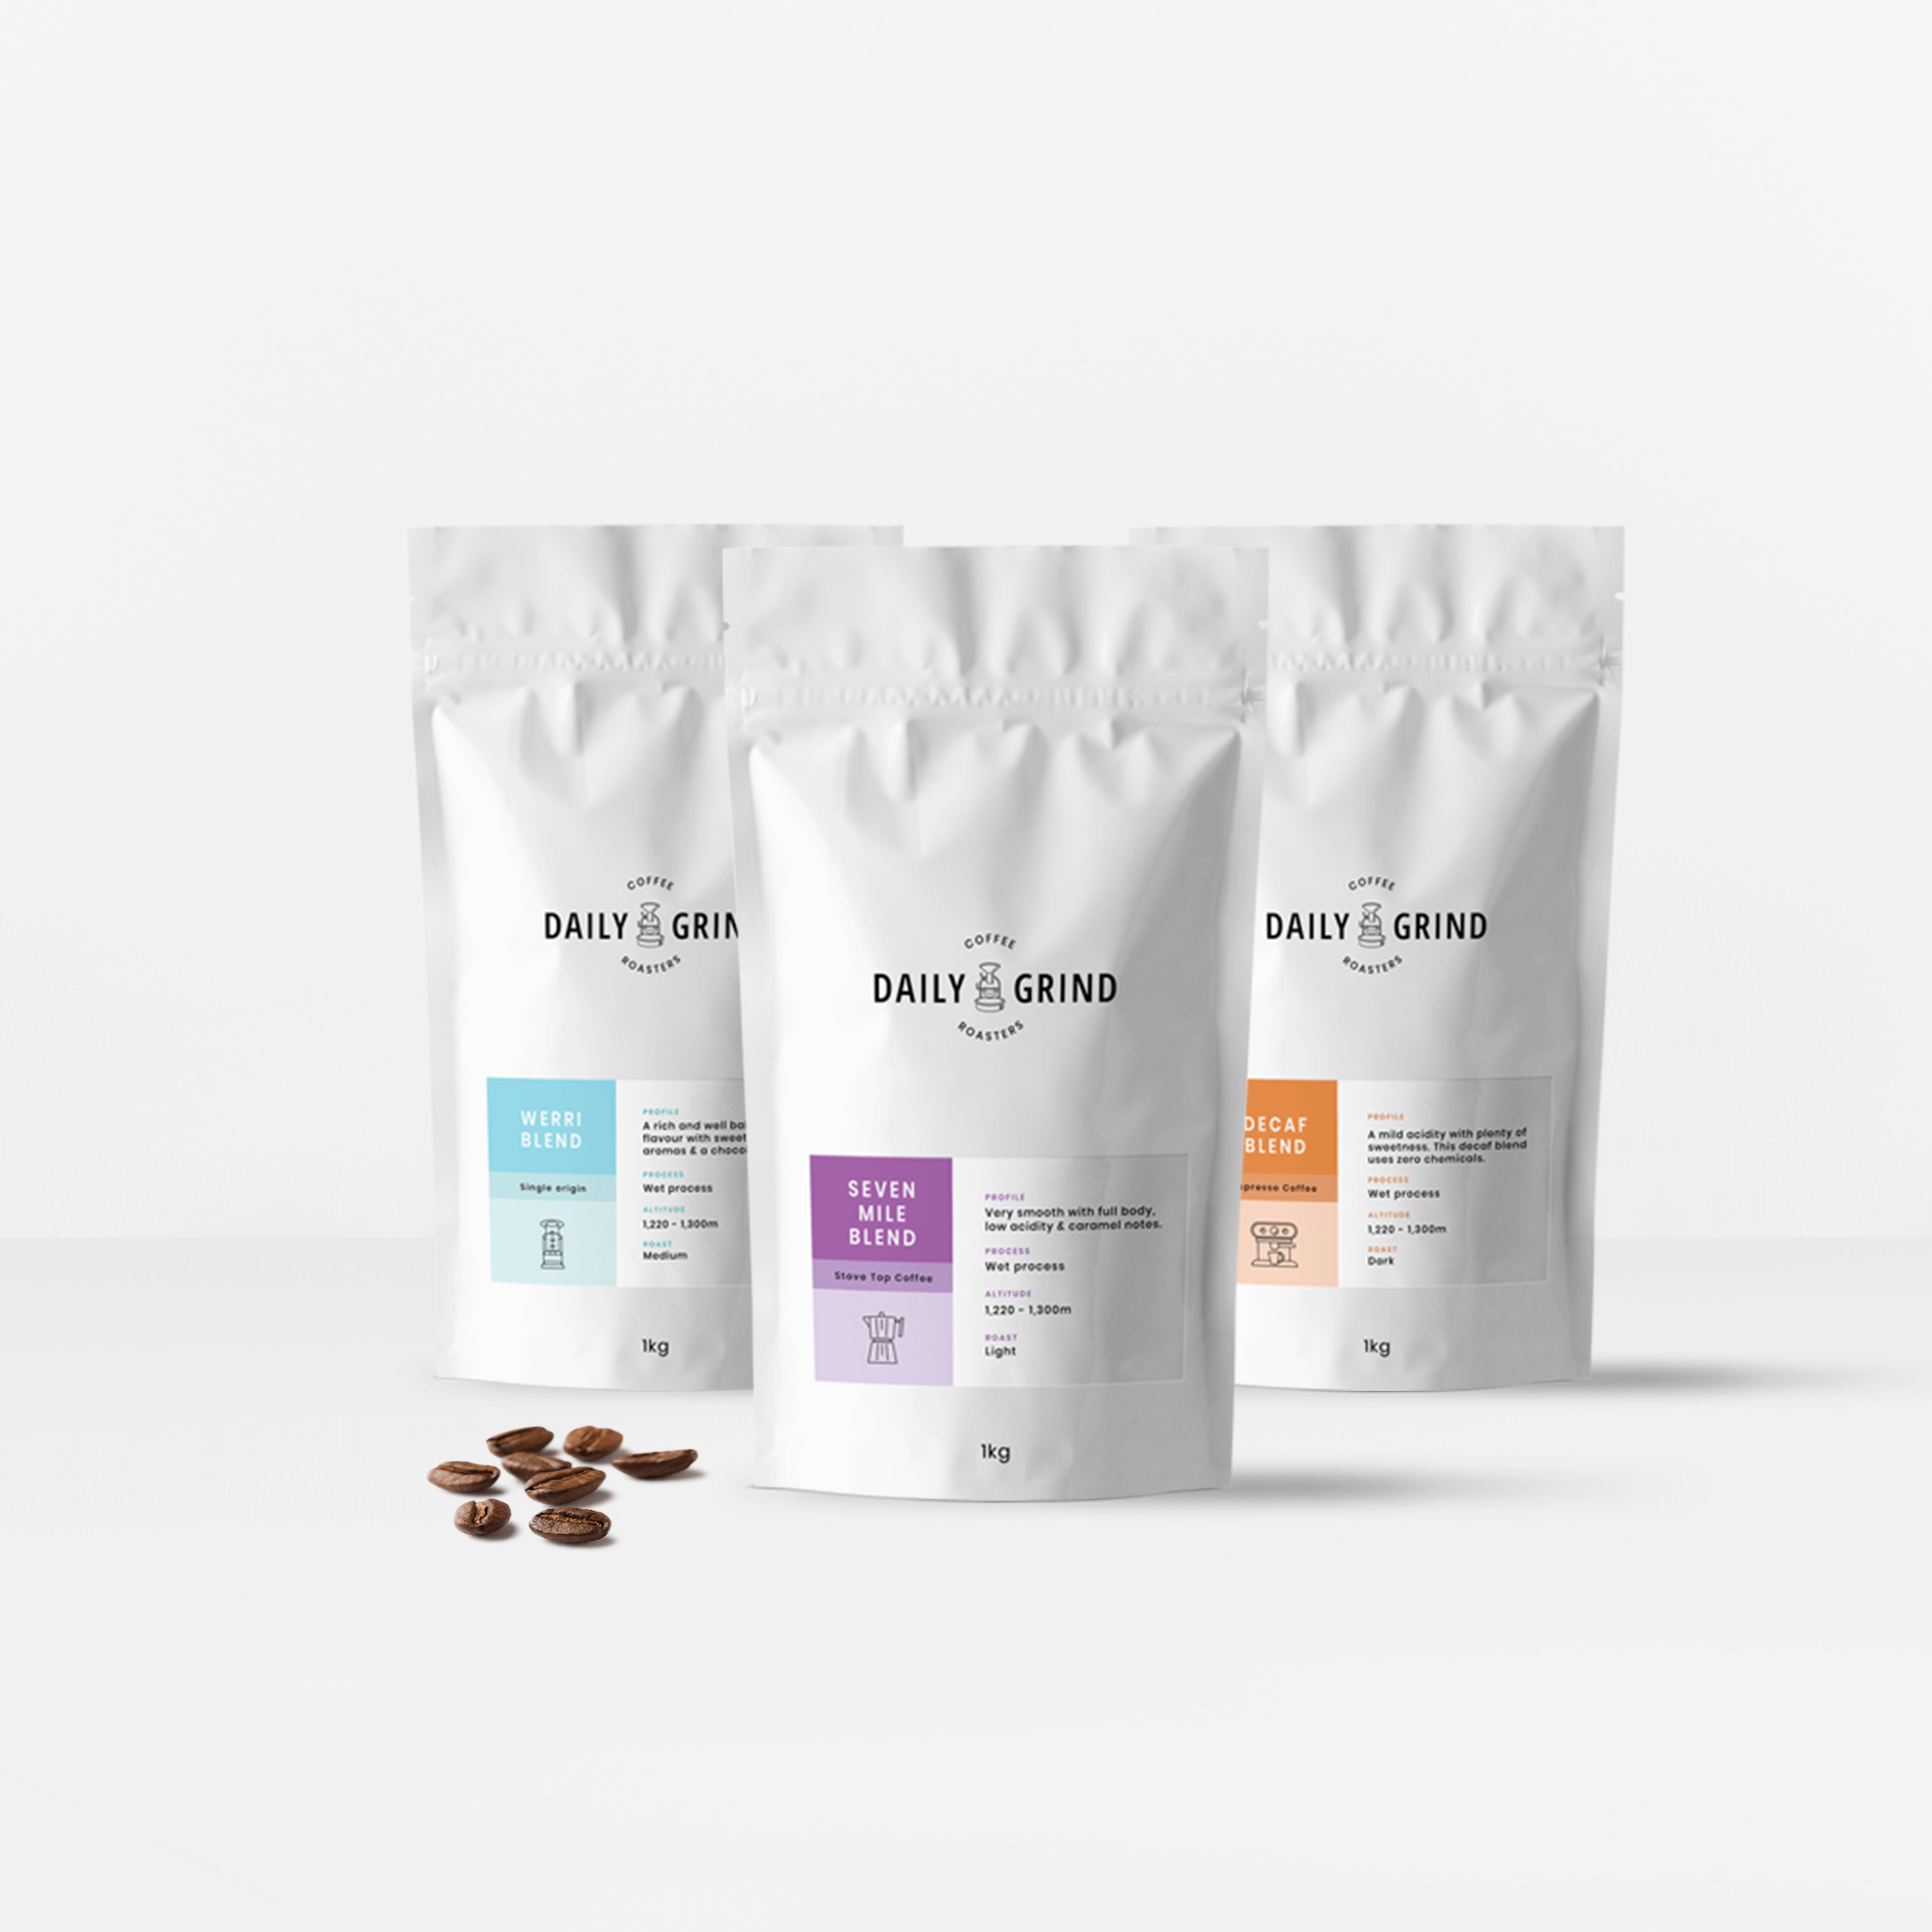 Retail Product Packaging Design for Daily Grind